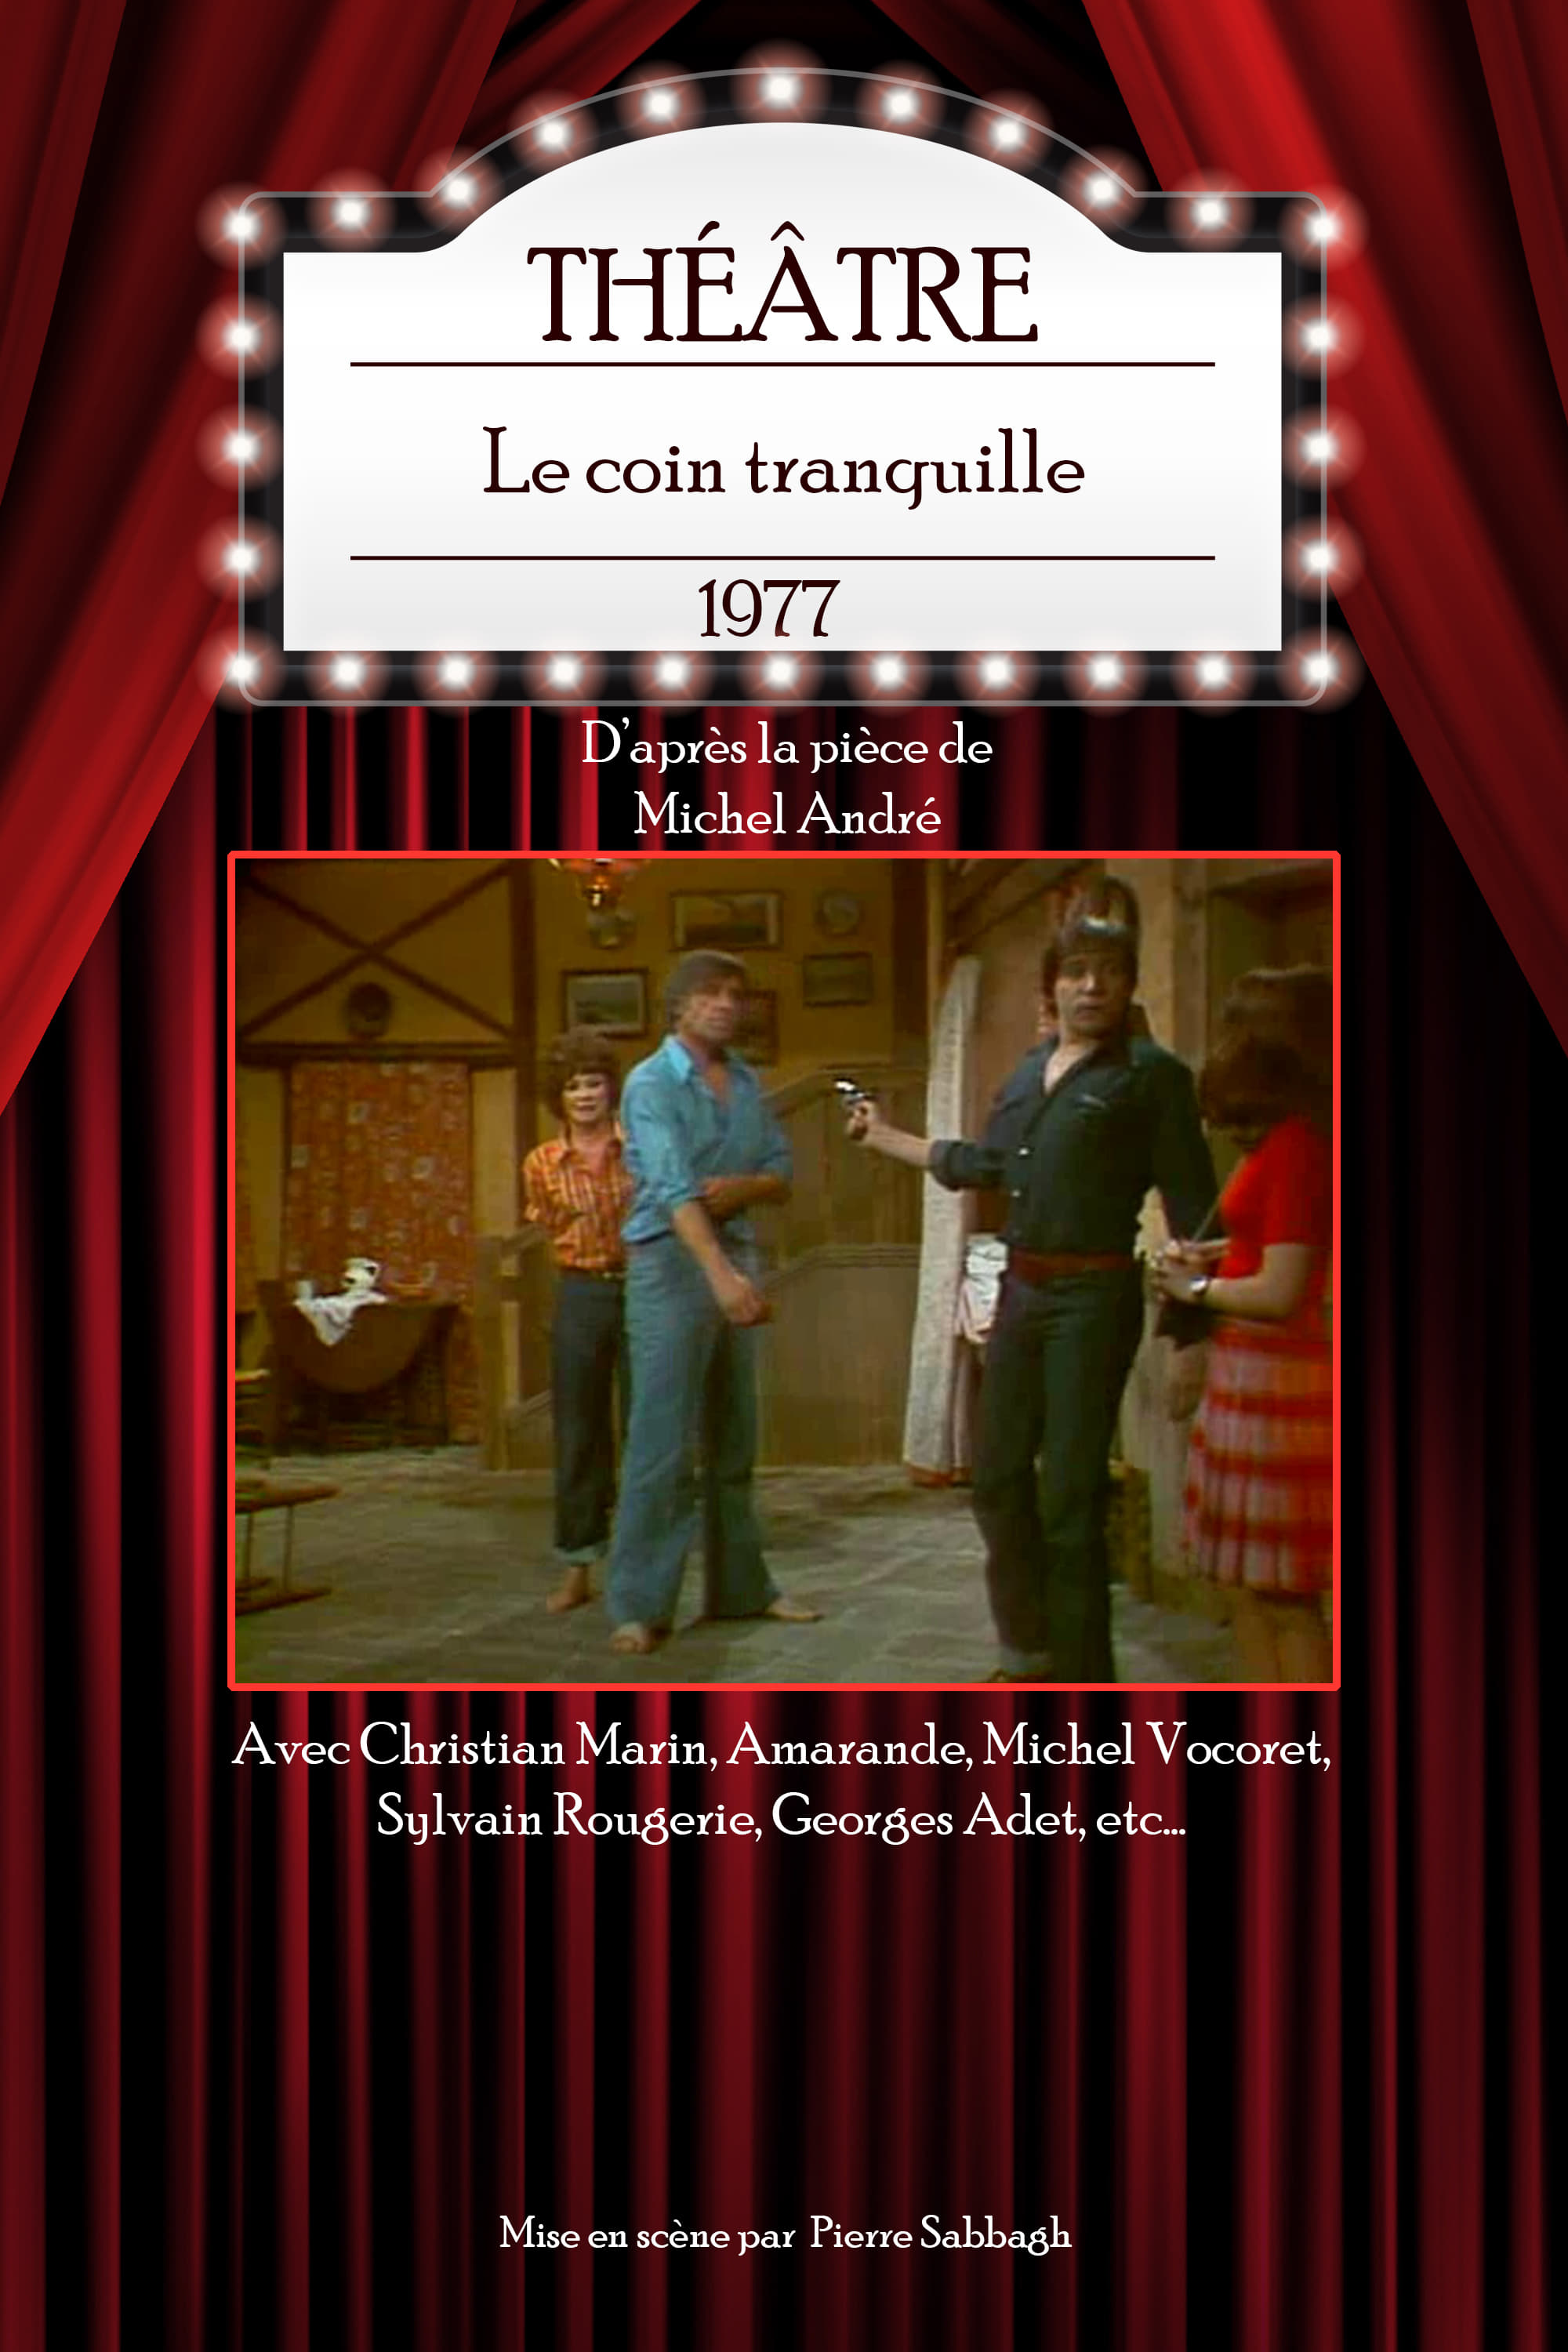 Le coin tranquille (1977)